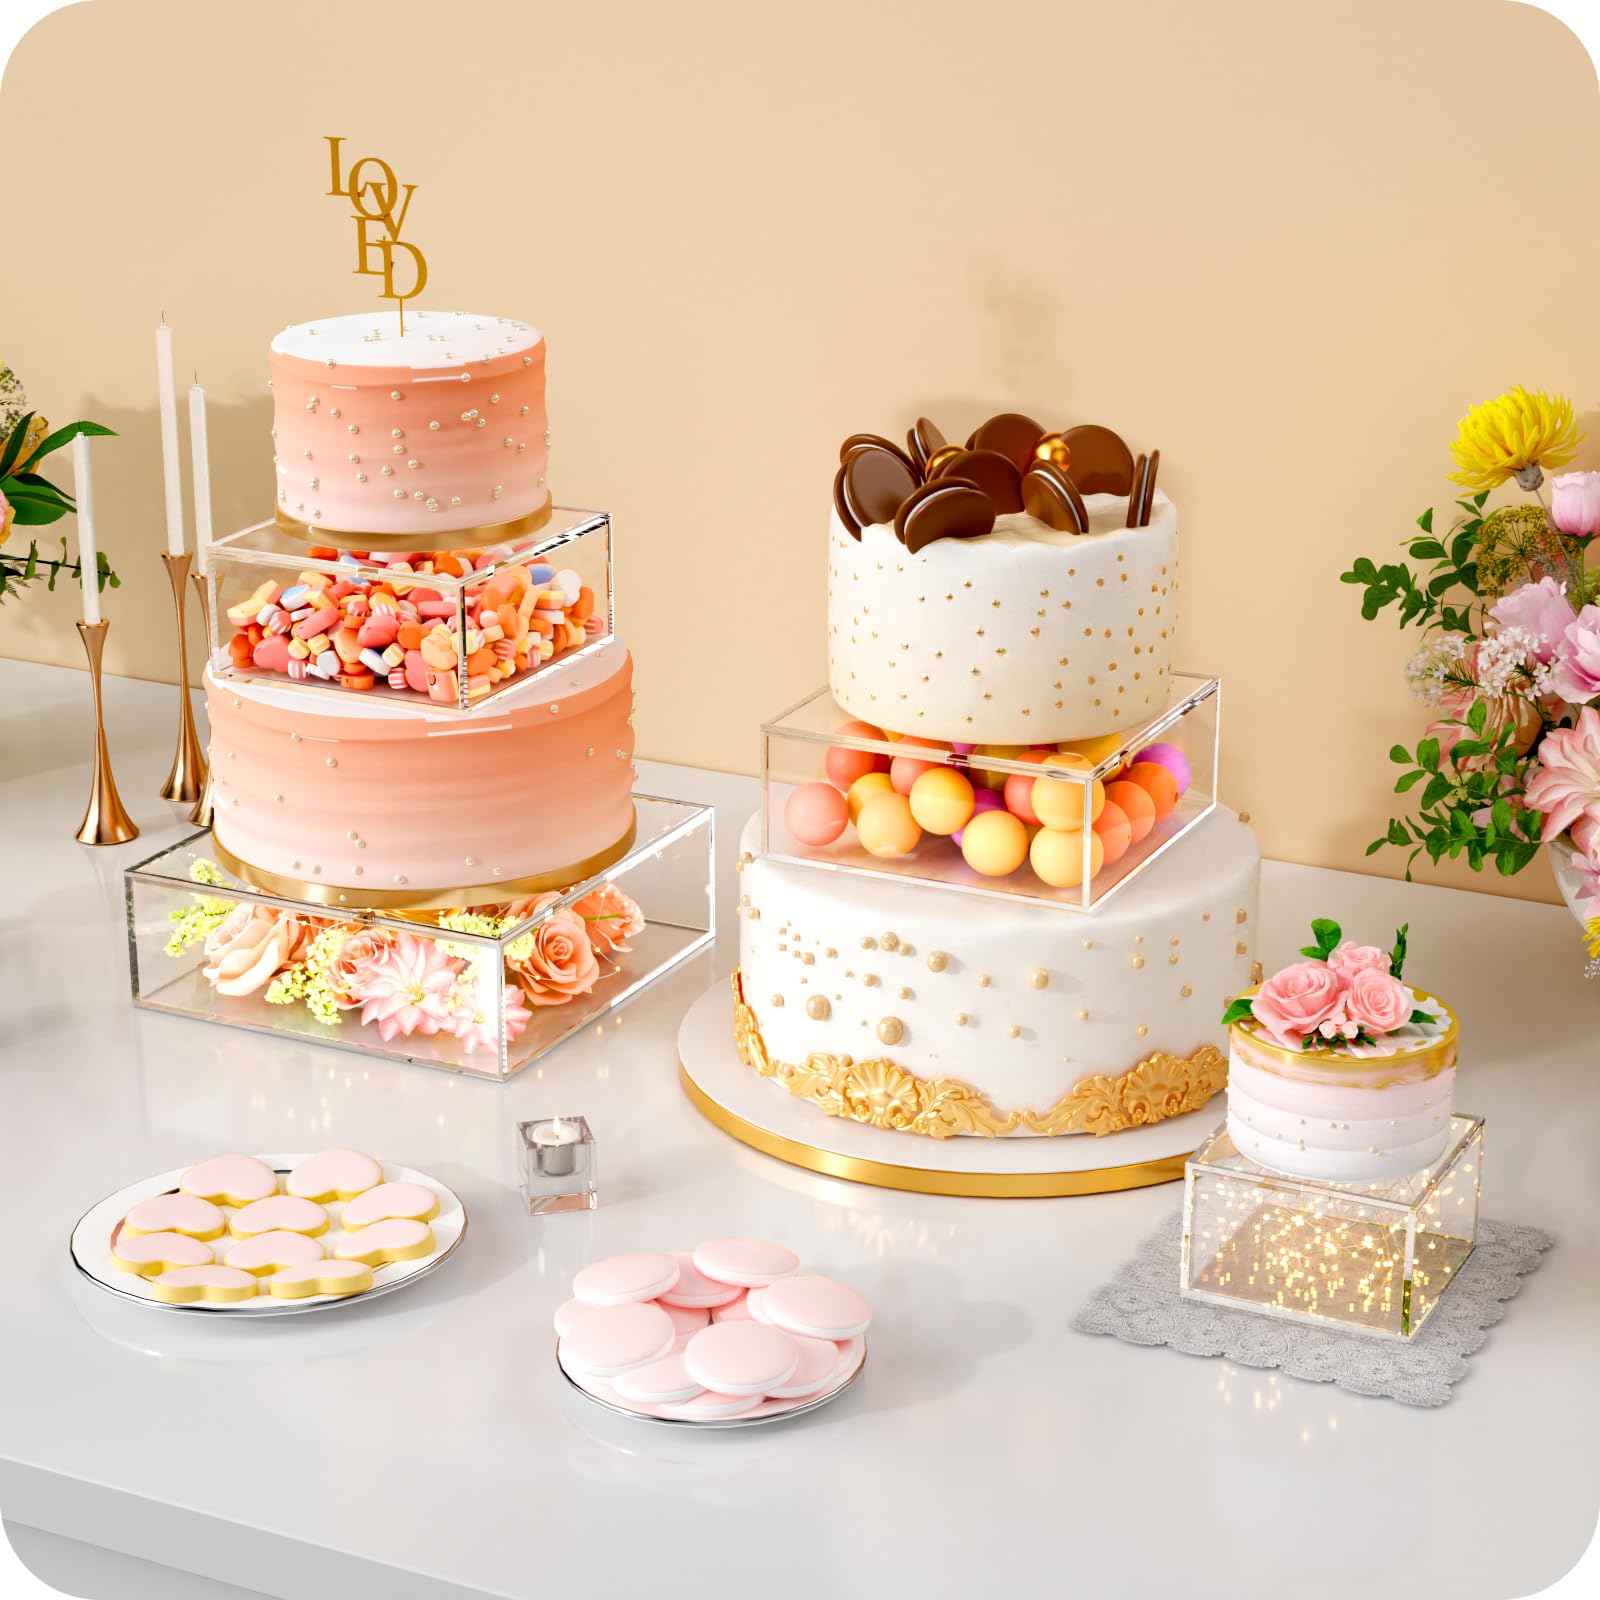 2PCS Clear Acrylic Cake Stand, Fillable Cake Box Riser Cake Tier, Square Cake Display Box with Lid, Decorative Centerpiece Box for Wedding Birthday Party (2pcs, 10" Dx4” H; 6" Dx4” H, 2M LED Lights)